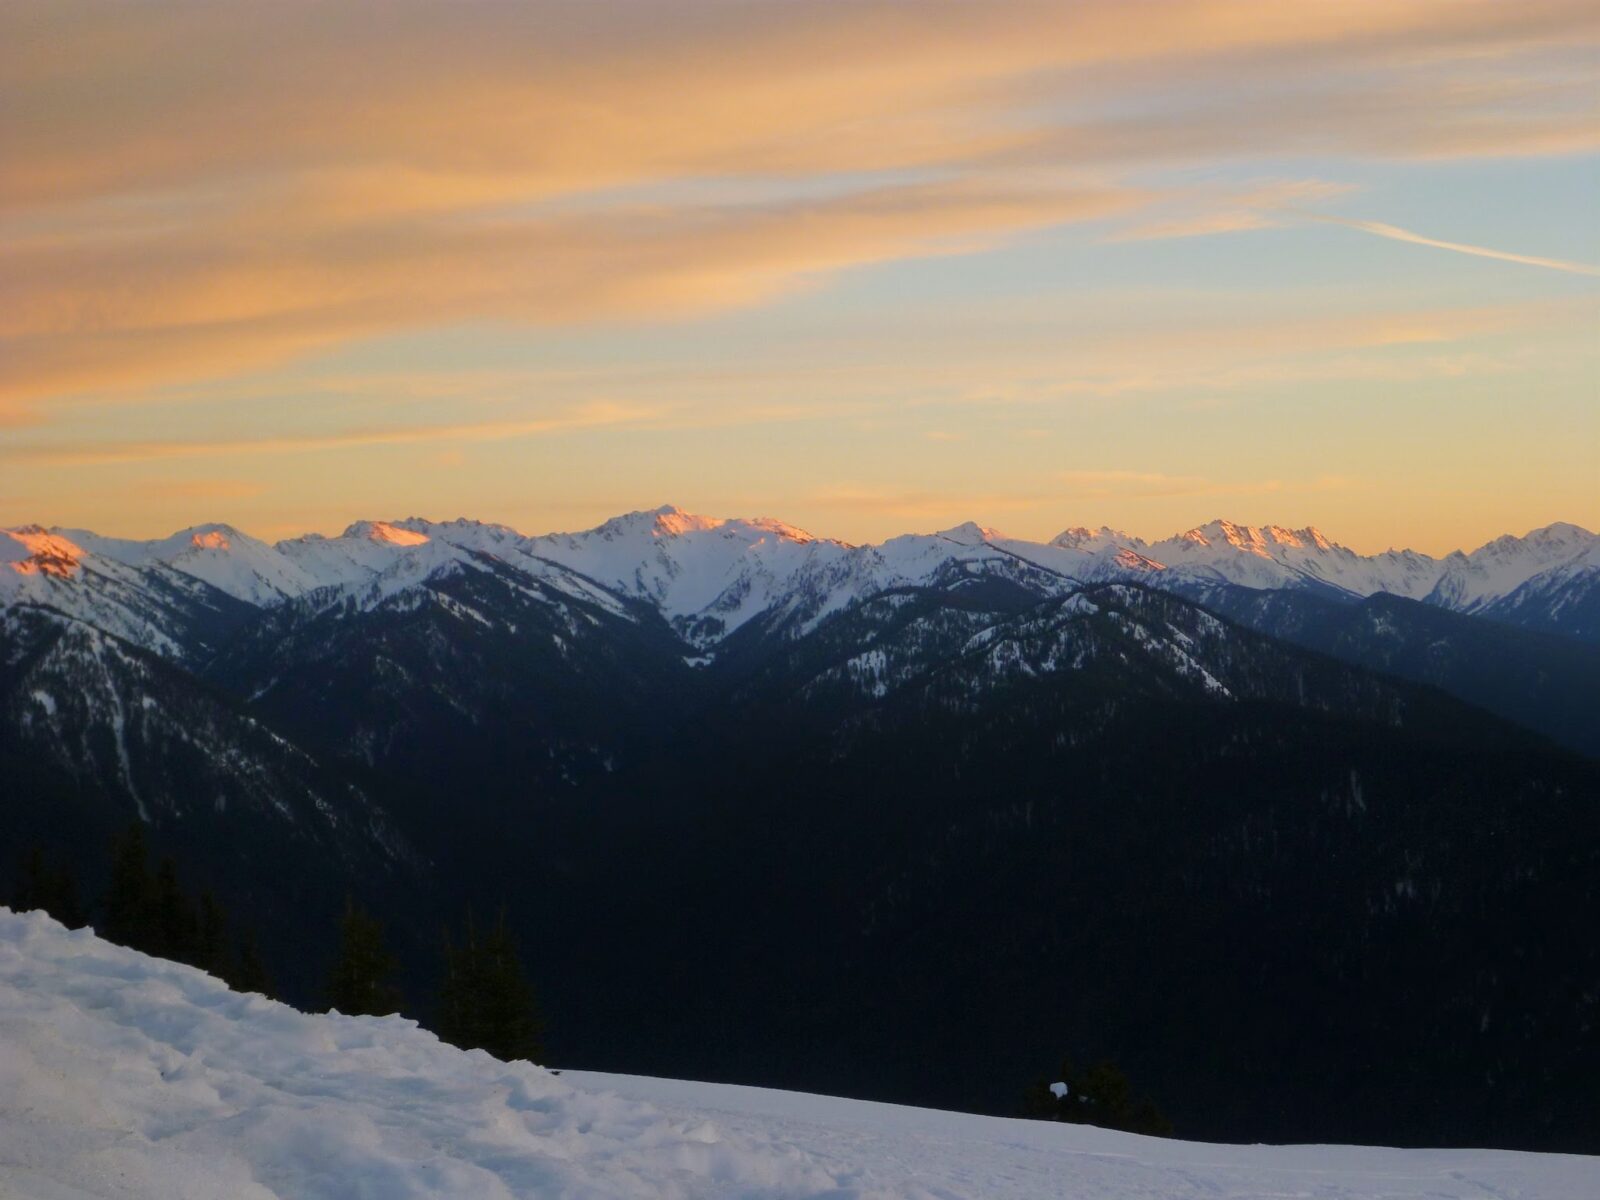 Last bit of pink sunset lingers on the mountains of from Hurricane Ridge, a favorite day trip from Seattle